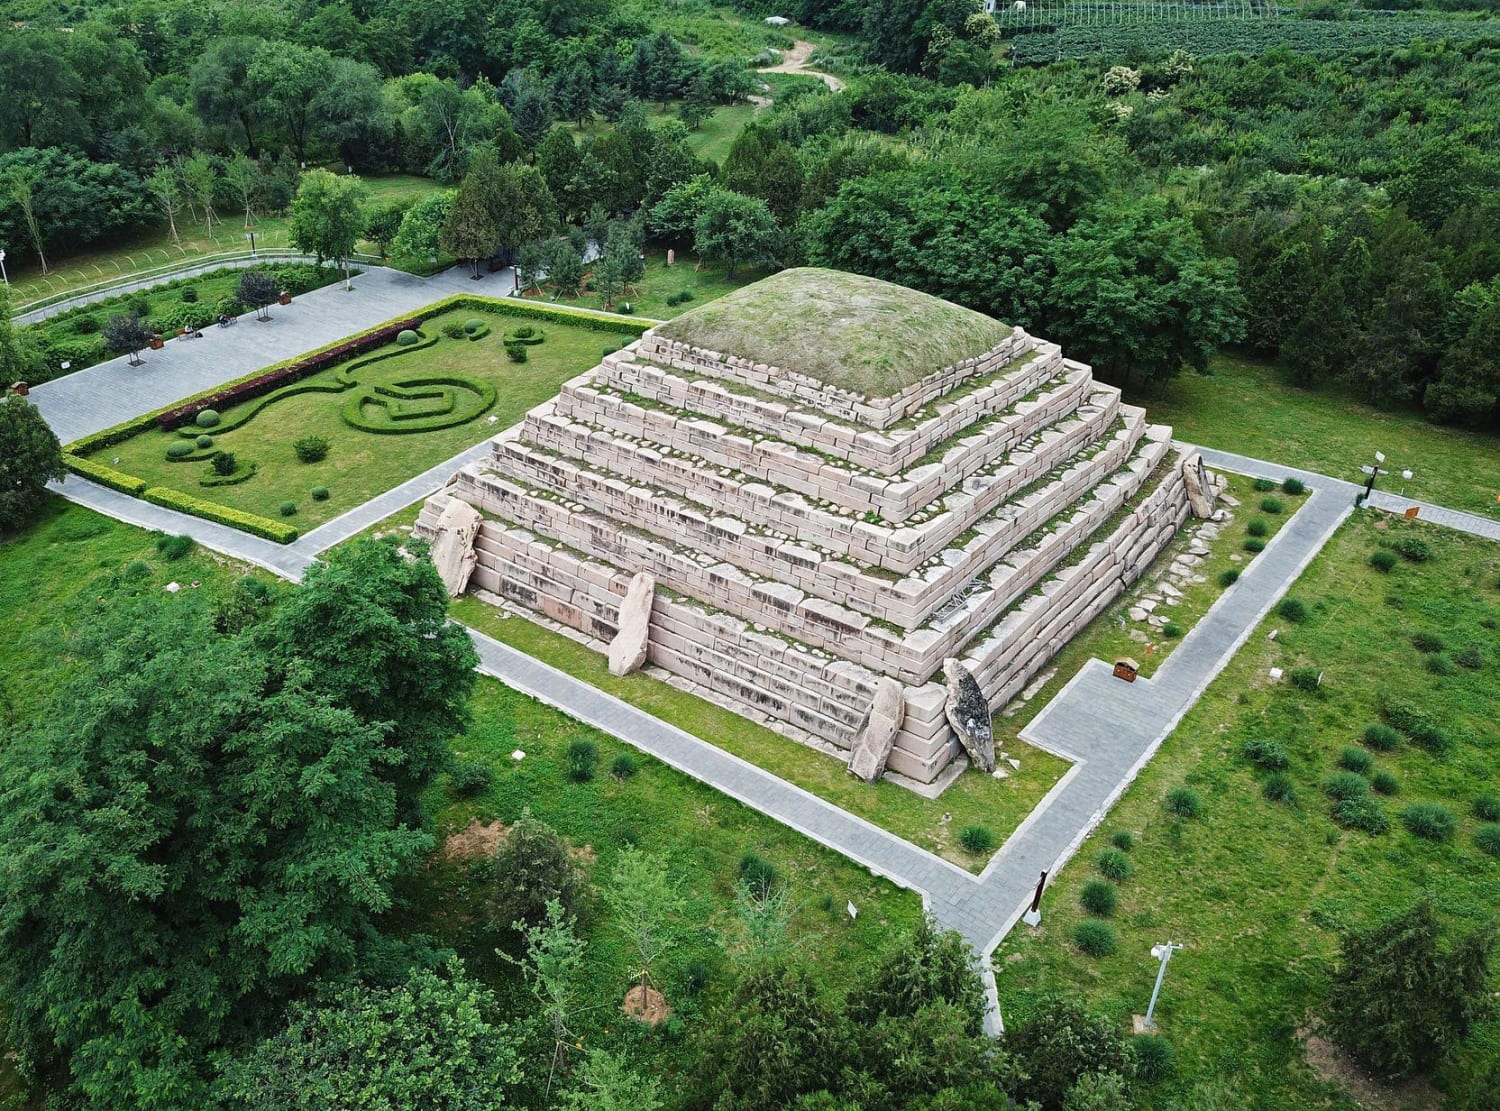 The Tomb of the General (Pyramid of the East) is a burial place for King Gwanggaeto the Great of Goguryeo (r. 391–412 CE). Located in city of Ji'an, China, near the border with North Korea.